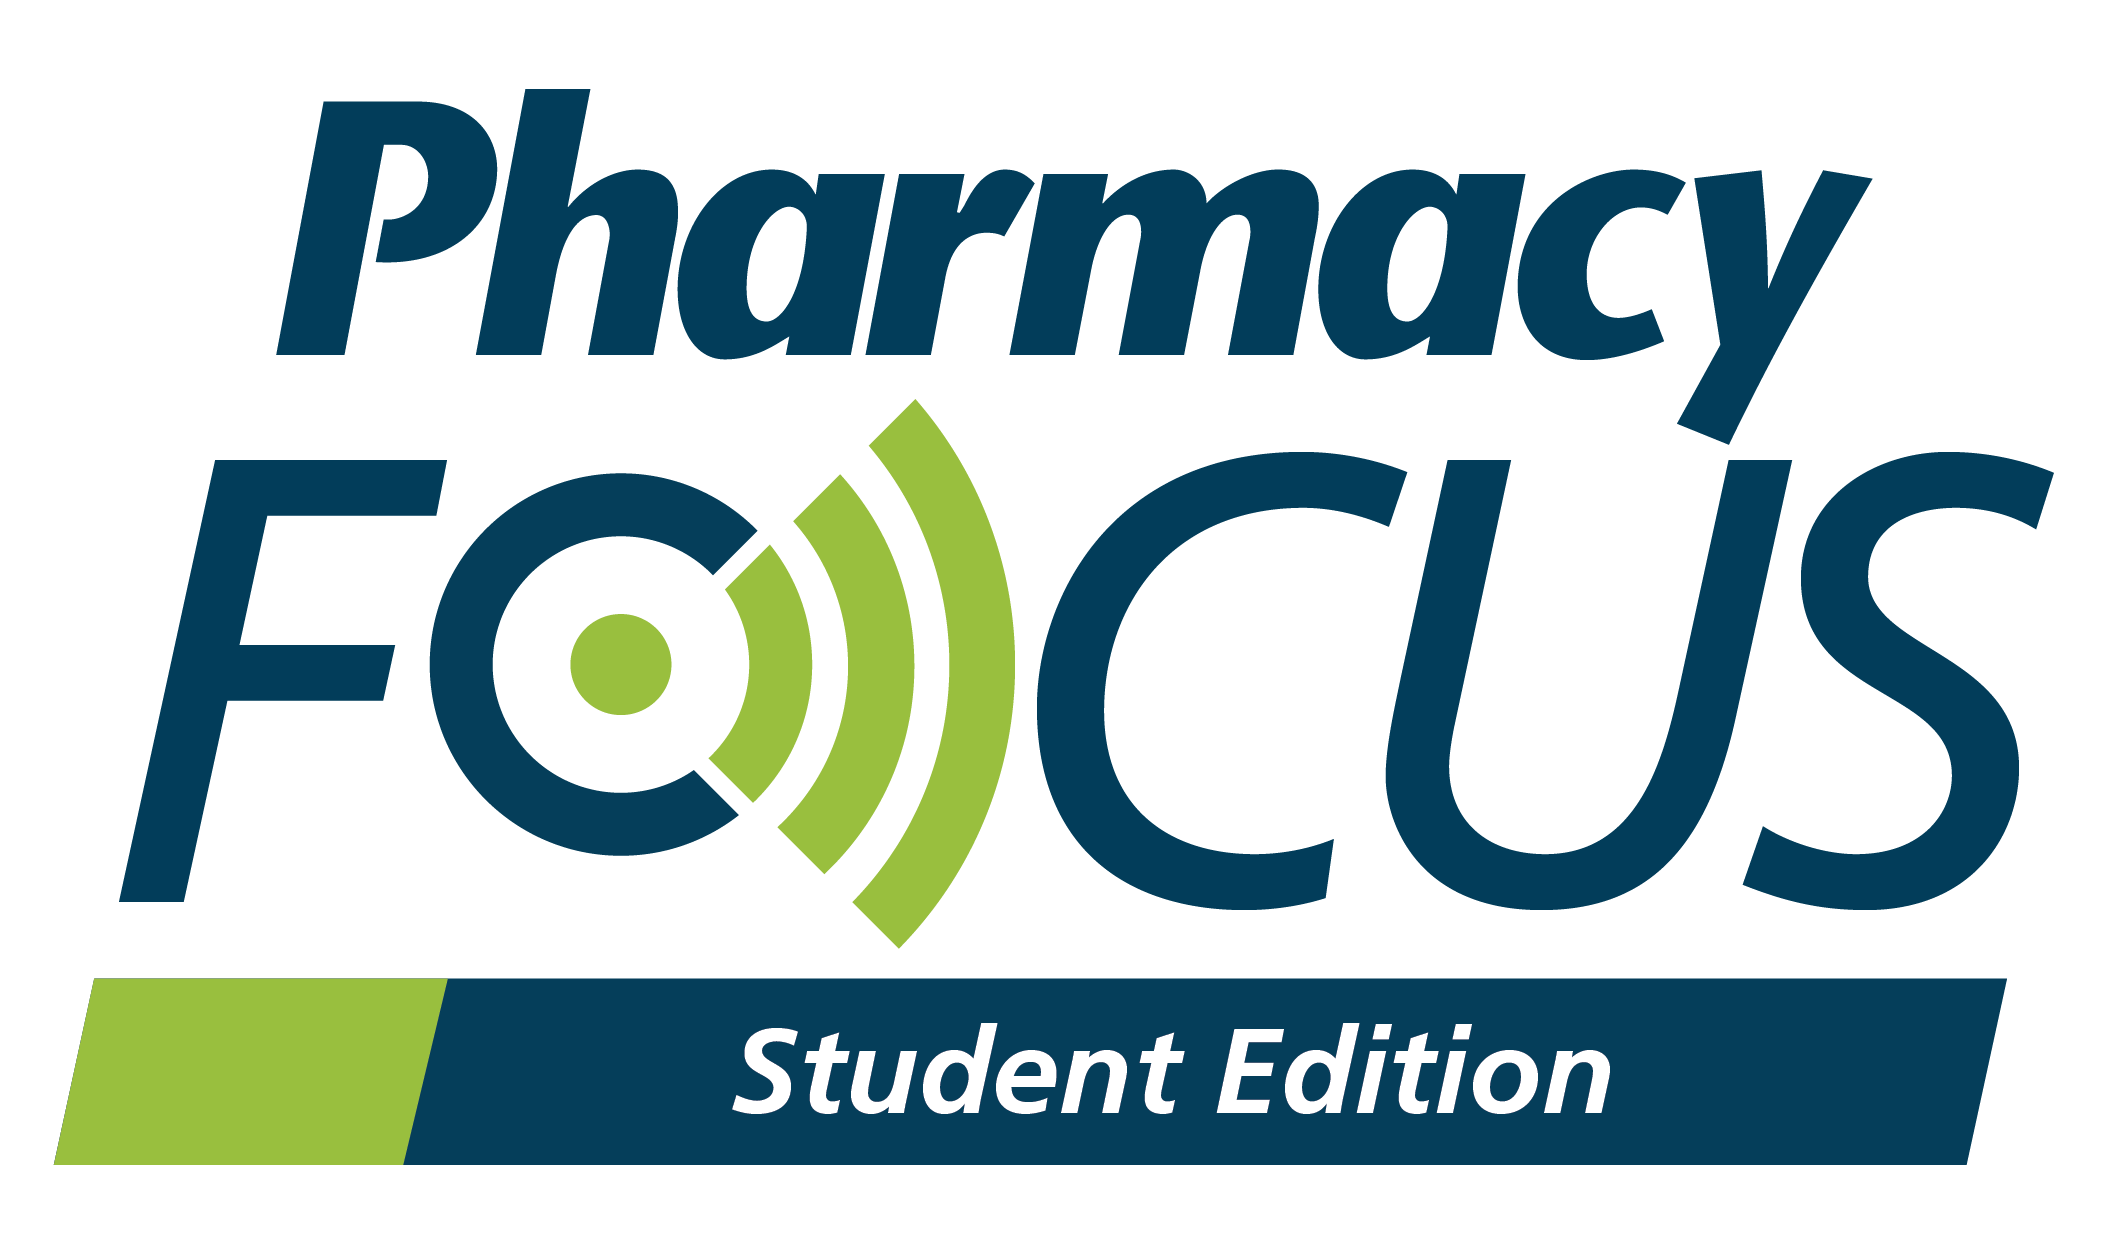 Pharmacy Focus: Student Edition - Giving Back to the Community as a Pharmacy Student